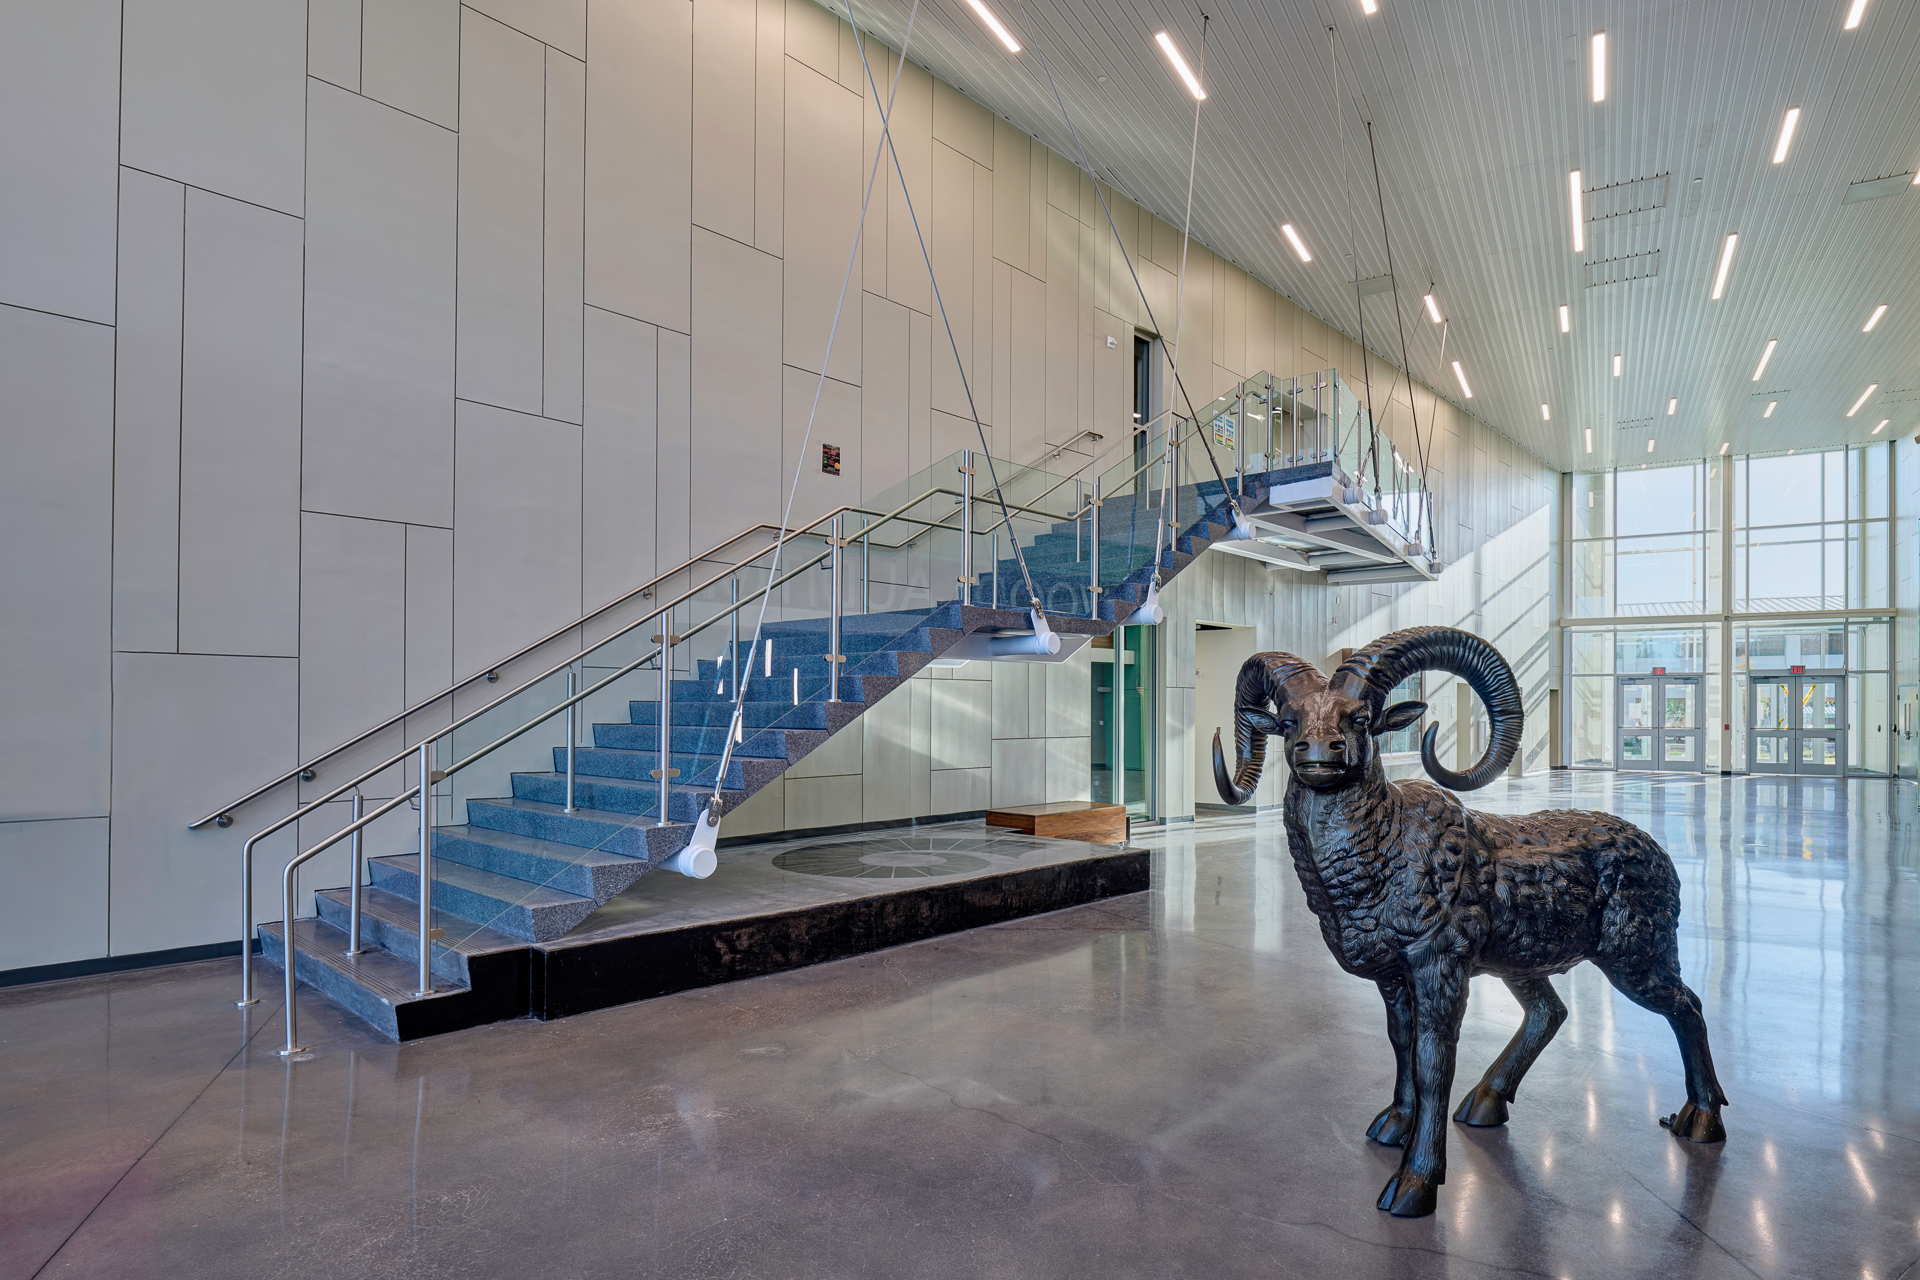 Interior Architectural Photography of Montwood High School in El Paso, Texas